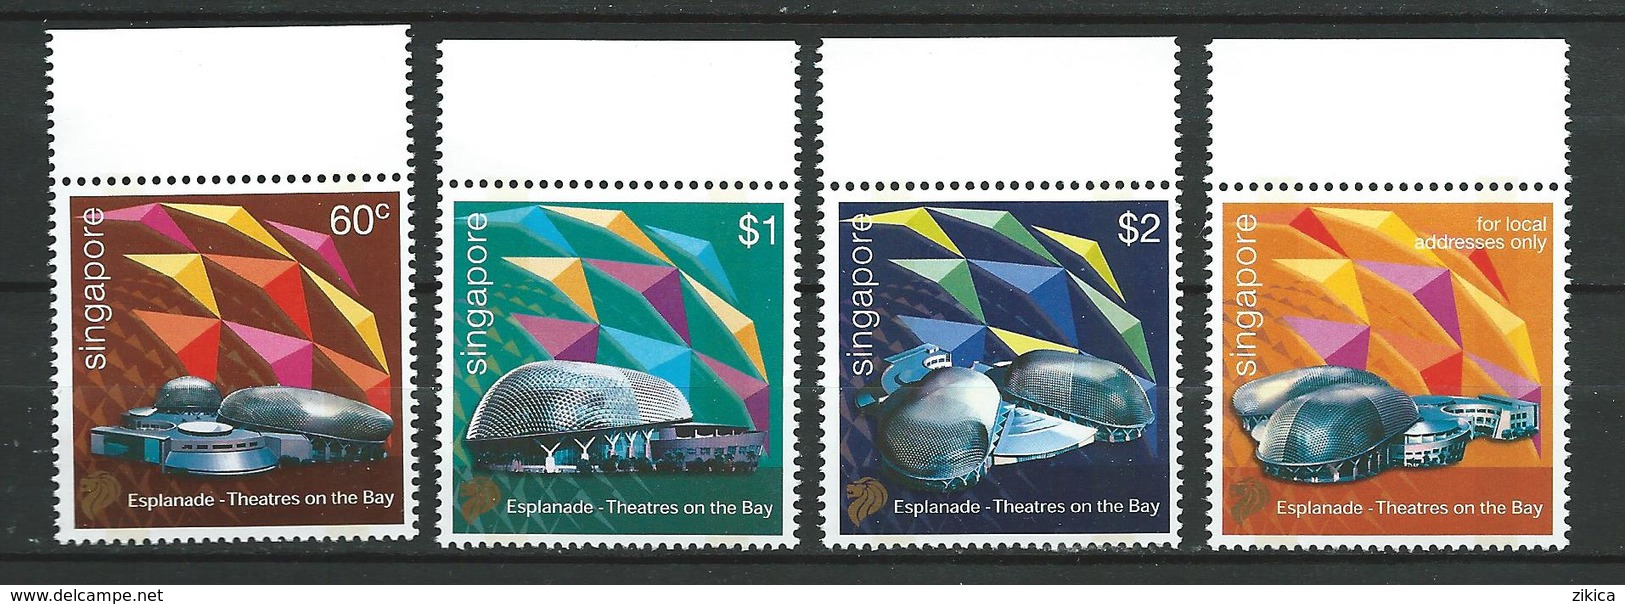 Singapore 2002 Inauguration Of The Center For The Performing Arts "Esplanade".stamps. MNH - Singapore (1959-...)